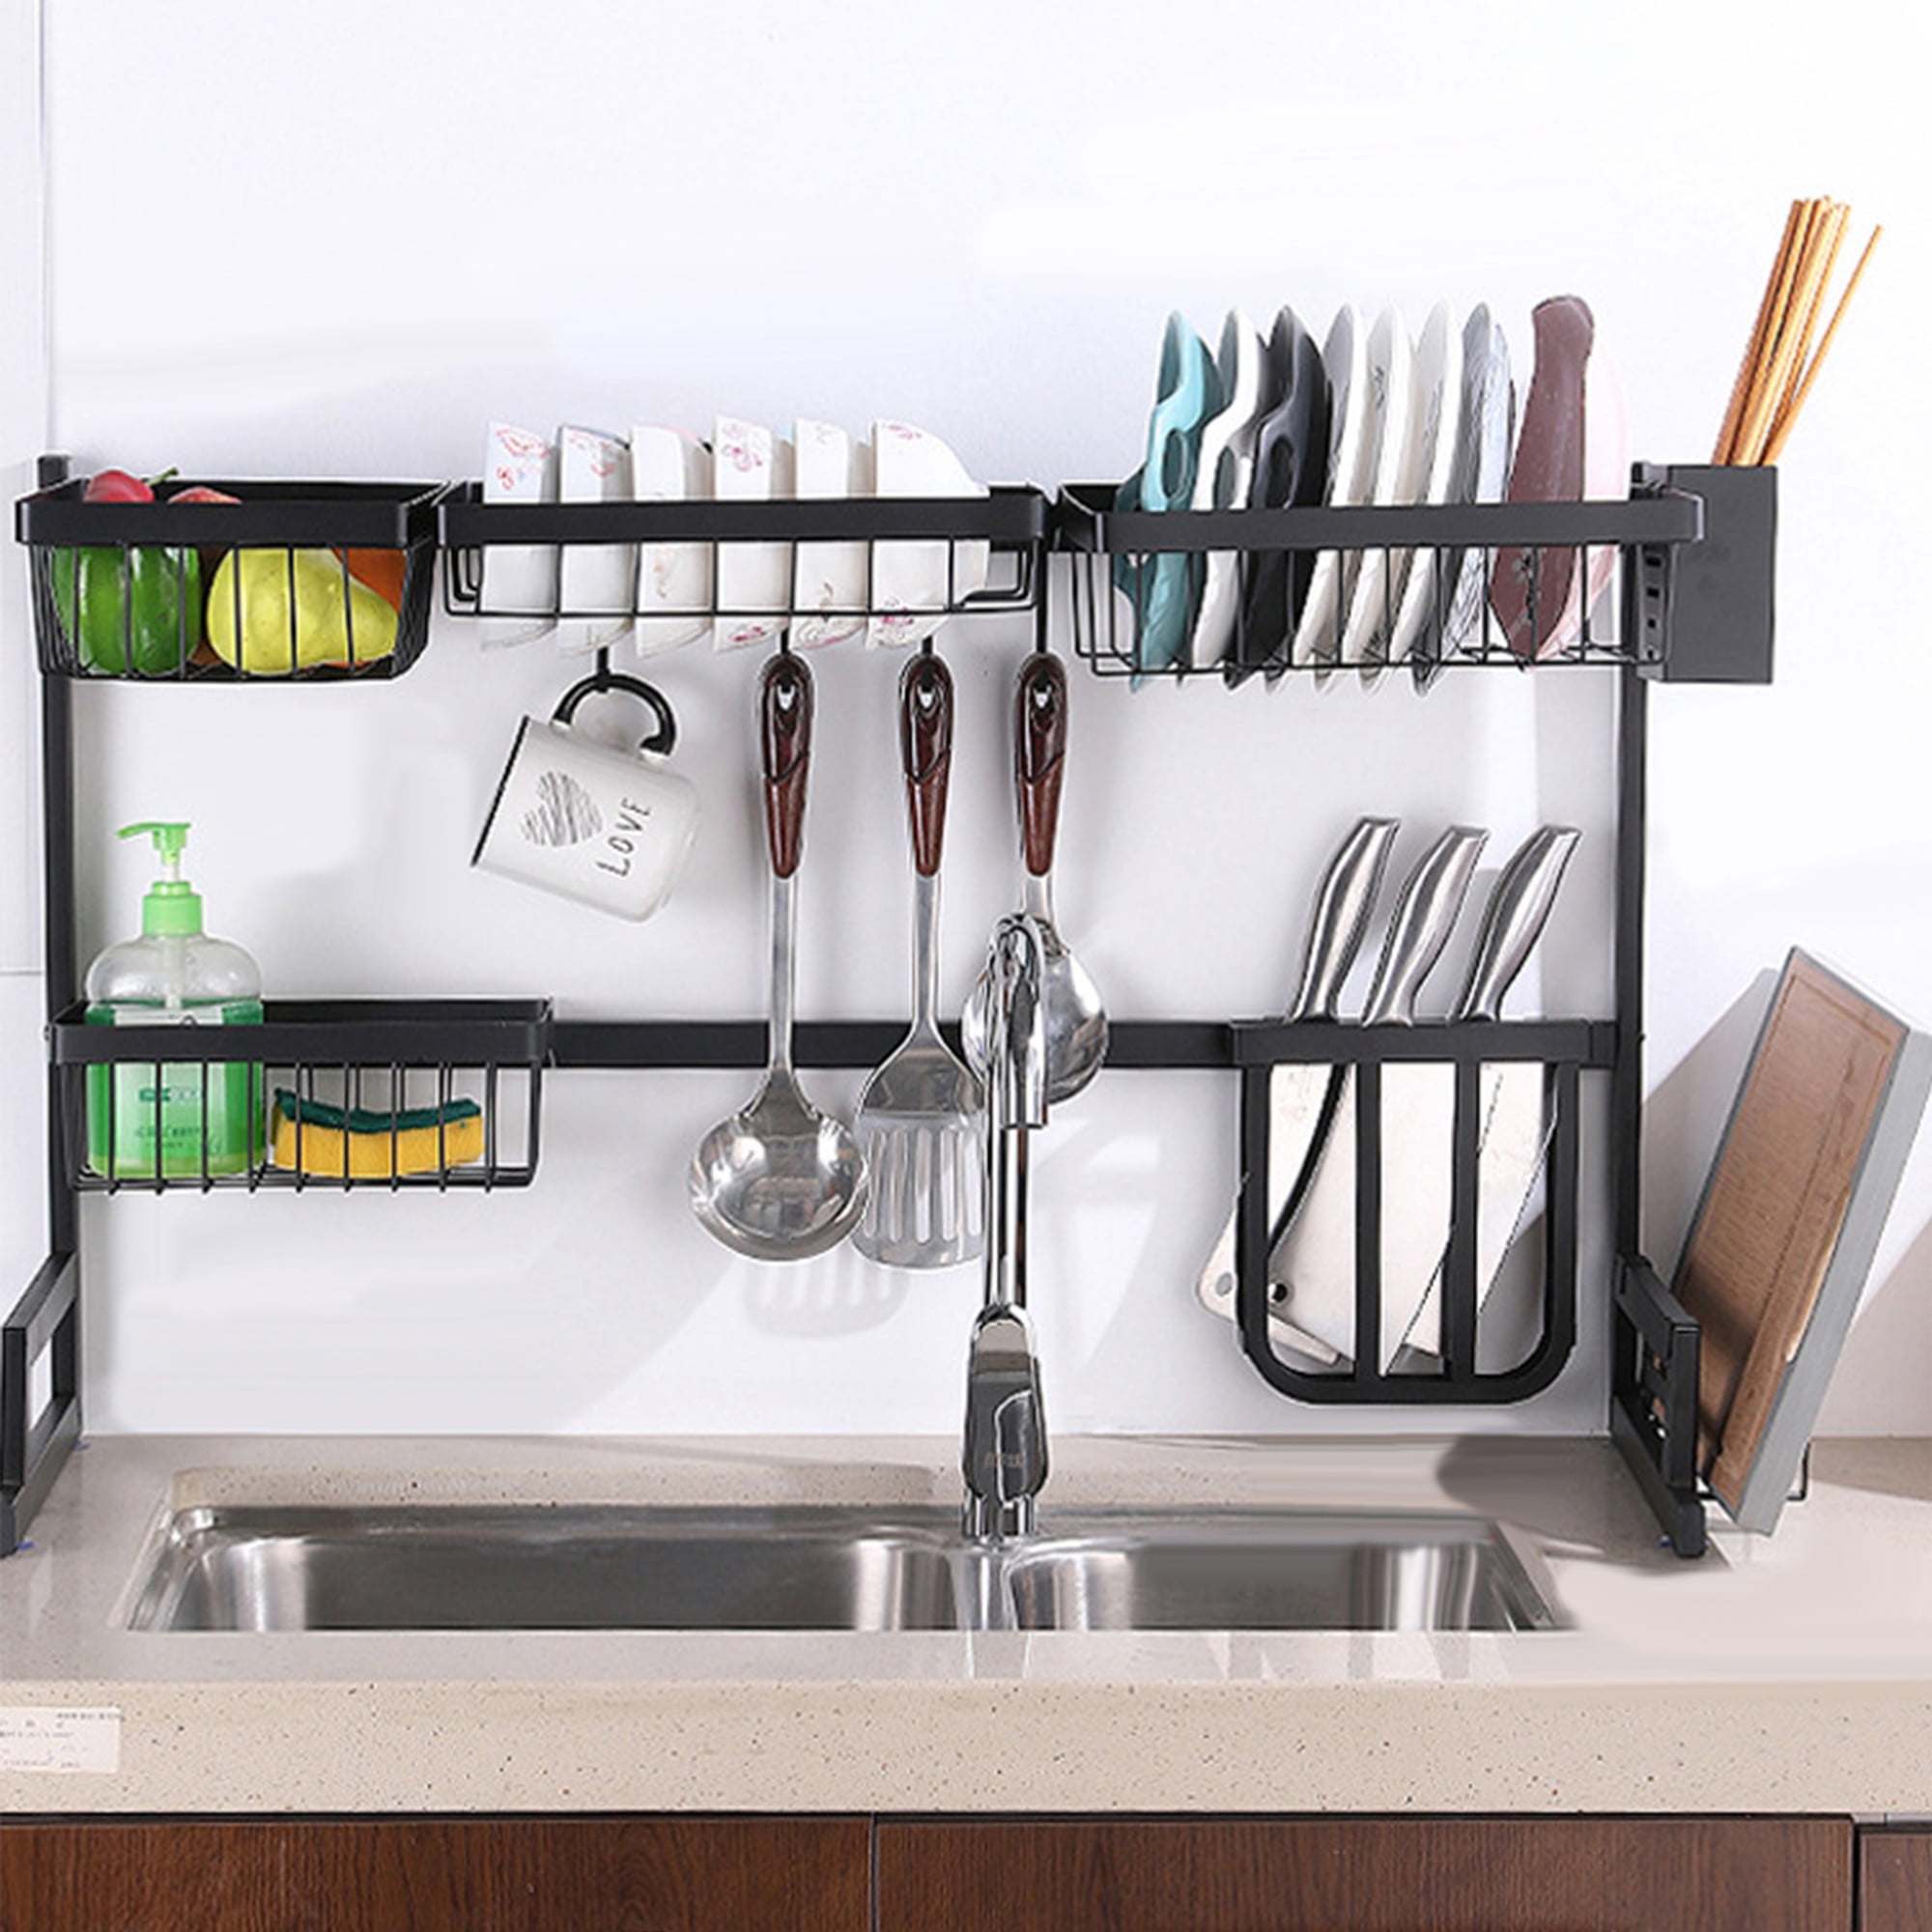 Rness Dish Drying Stand Over Sink, 2 Tier Large Capacity Organizer